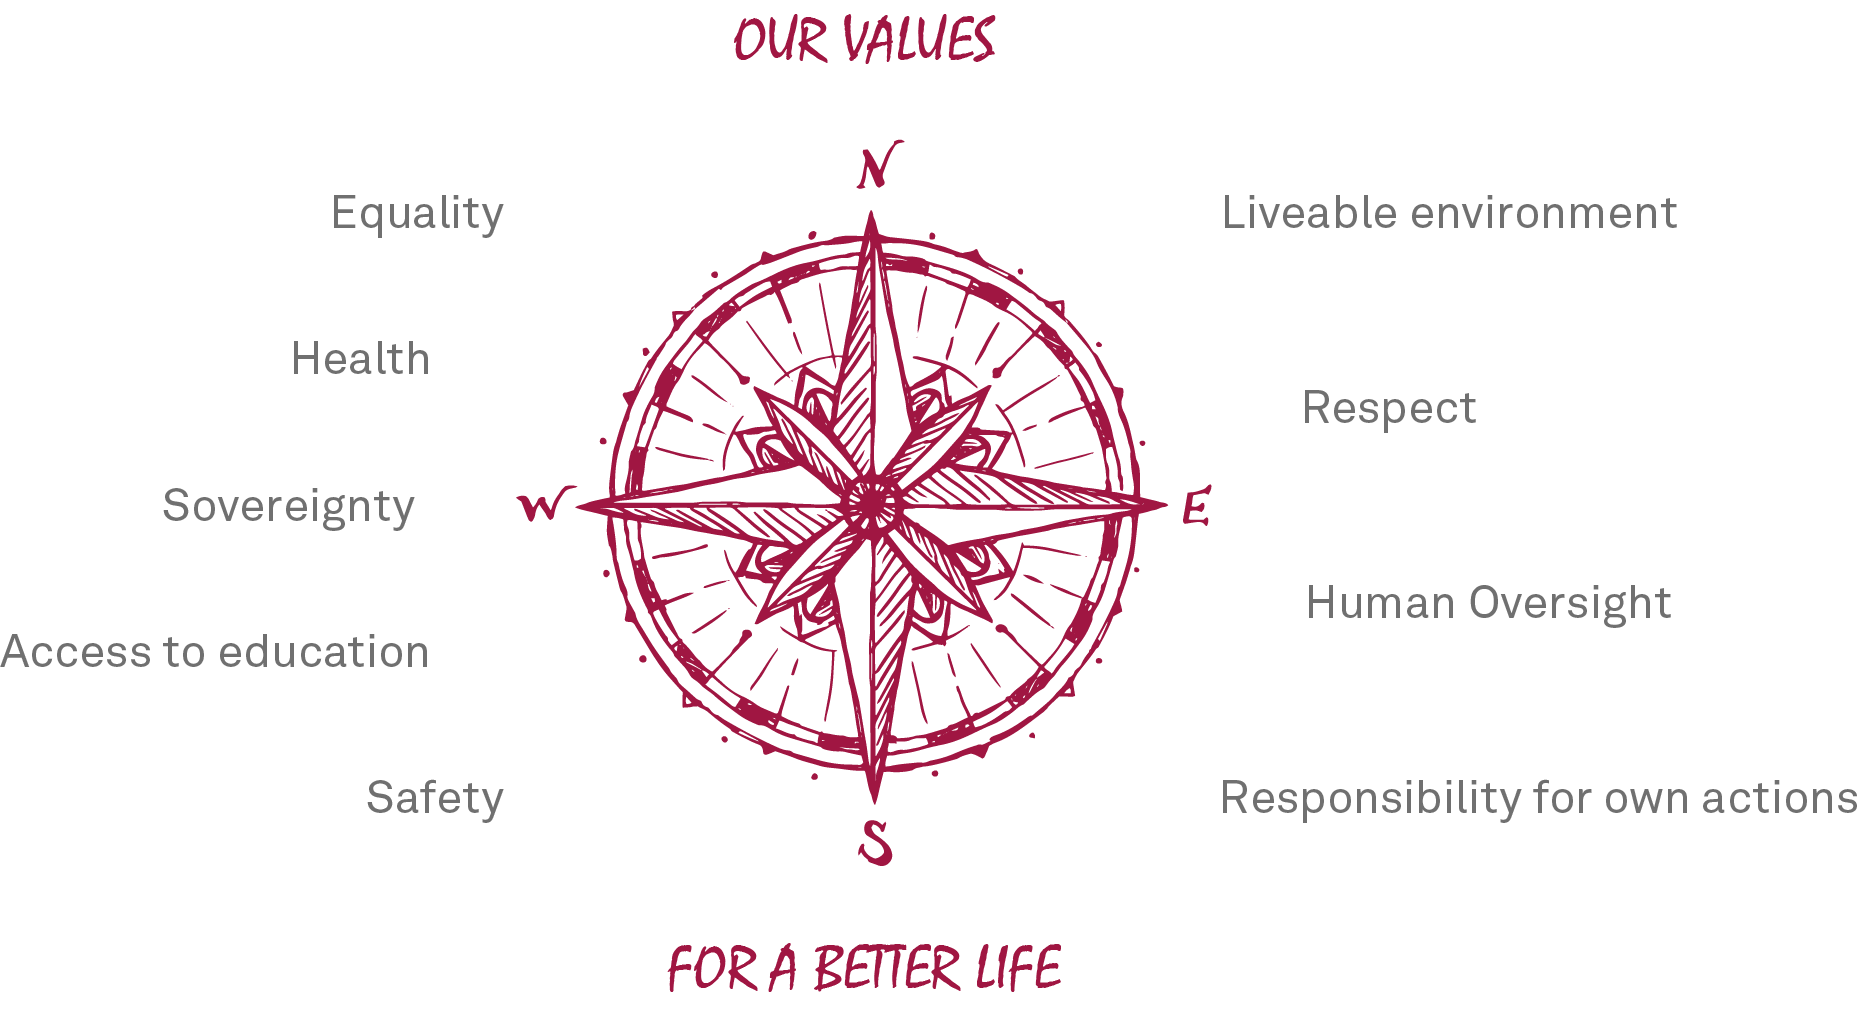 Digital Humanism - Our values for a better life